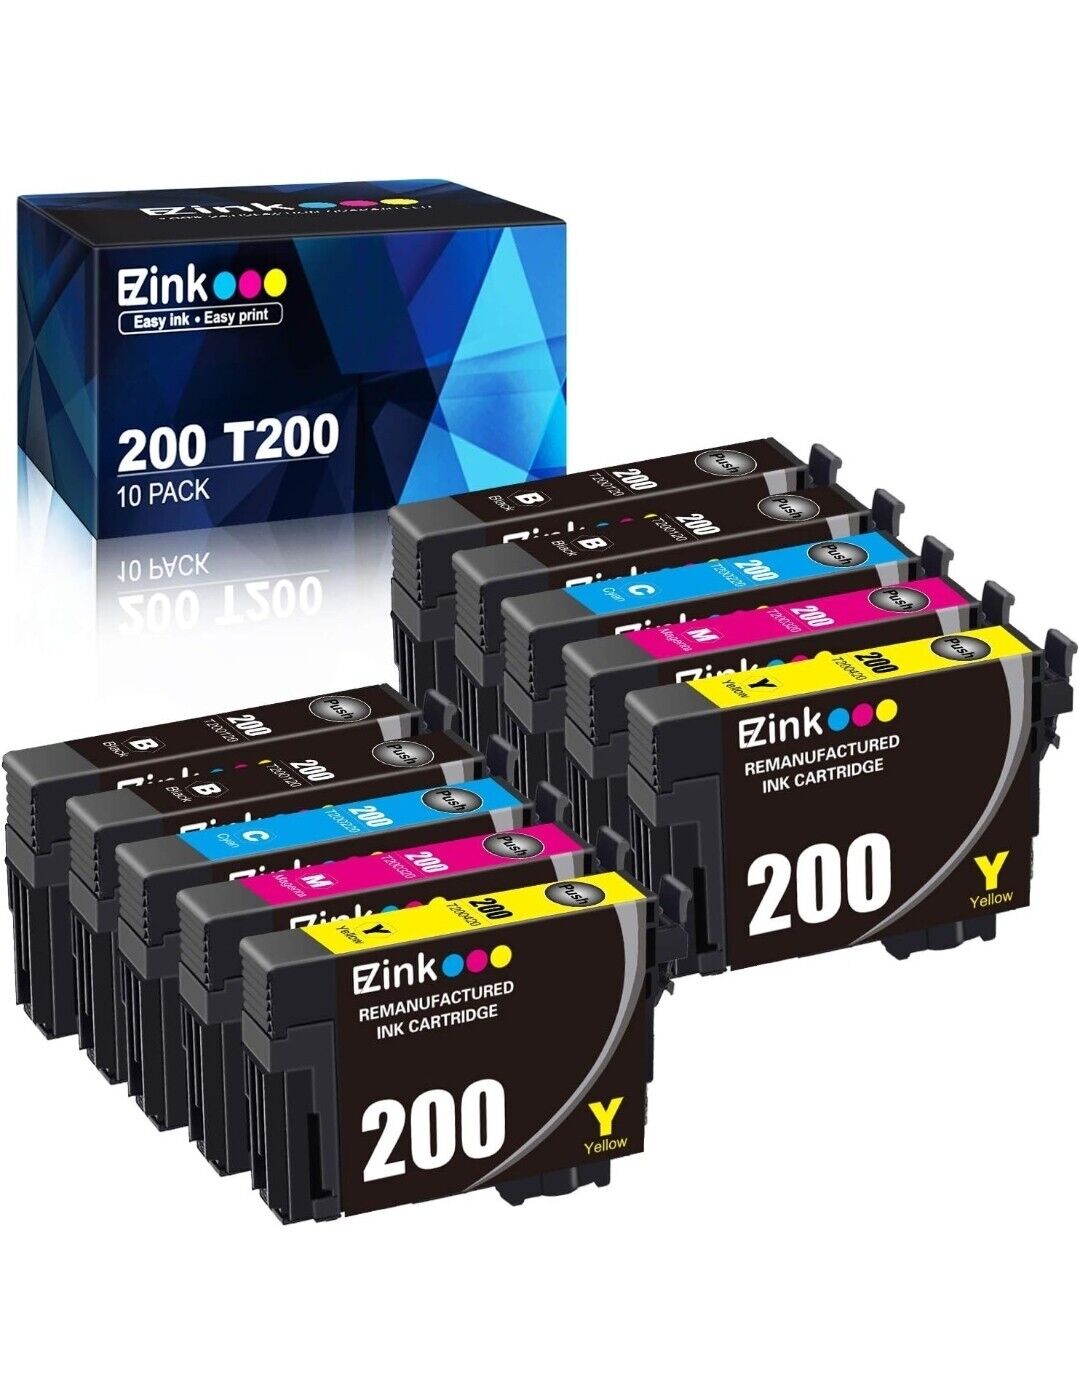 E-Z Ink (TM) Remanufactured Ink Cartridge Replacement for Epson 200 Printer 